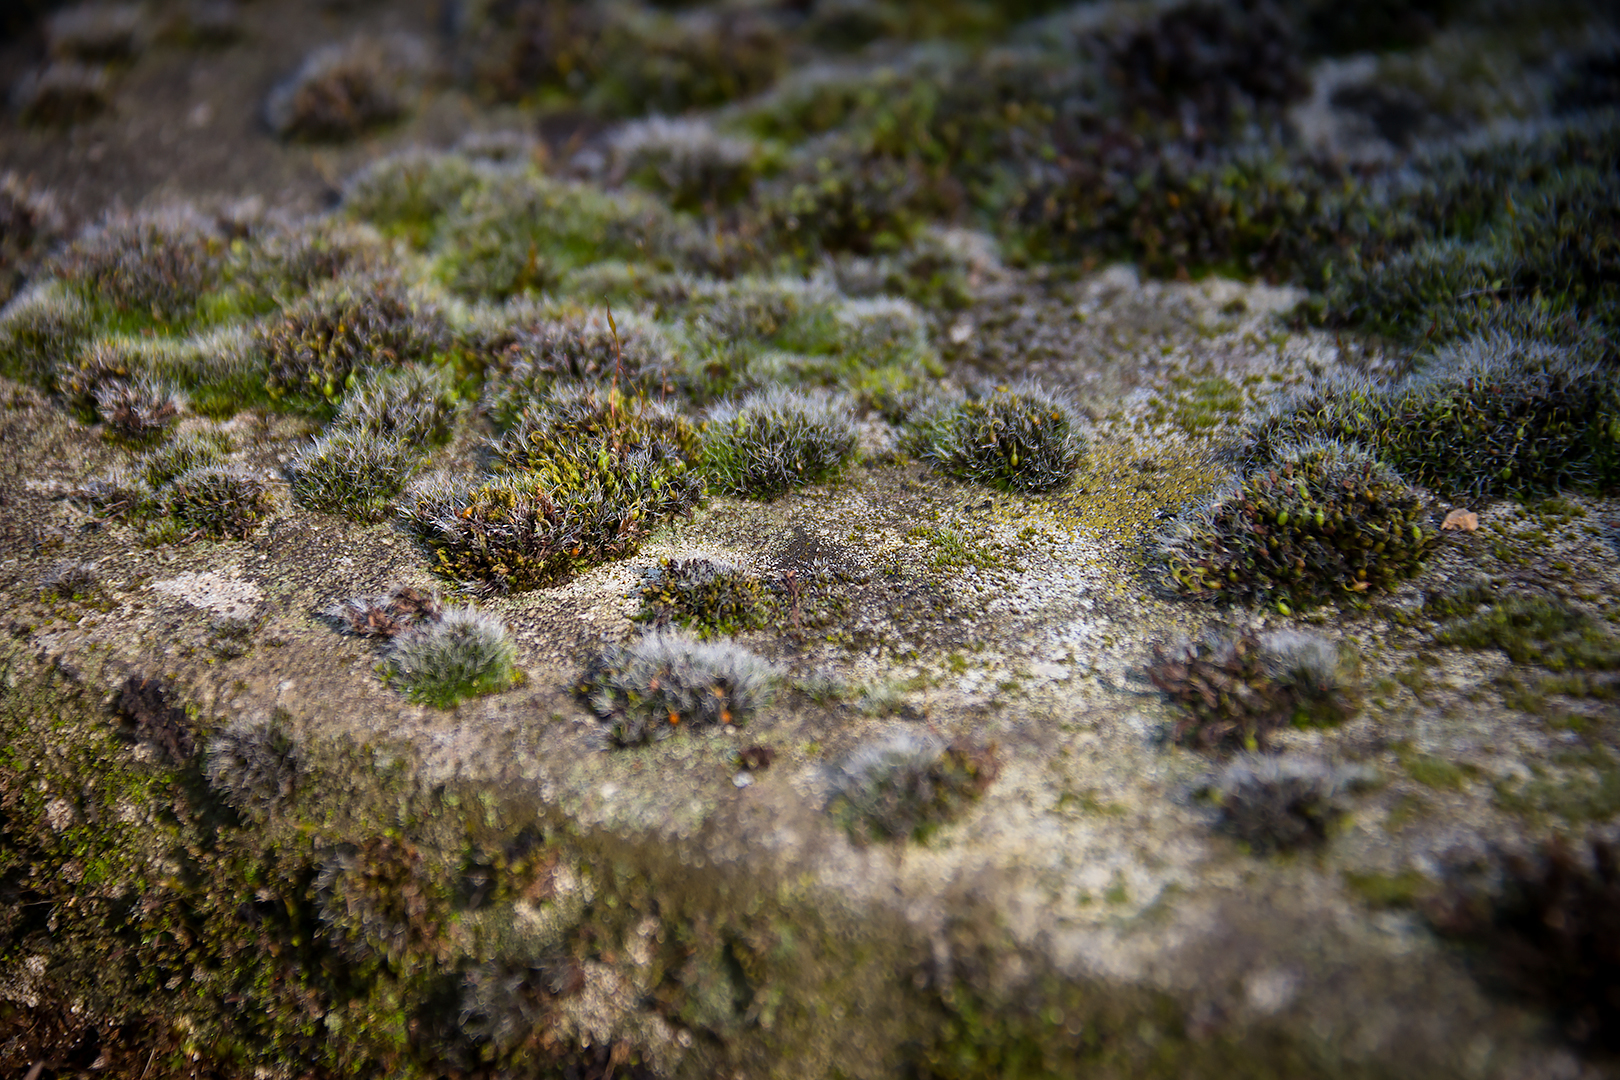 A detail of a small patch of moss